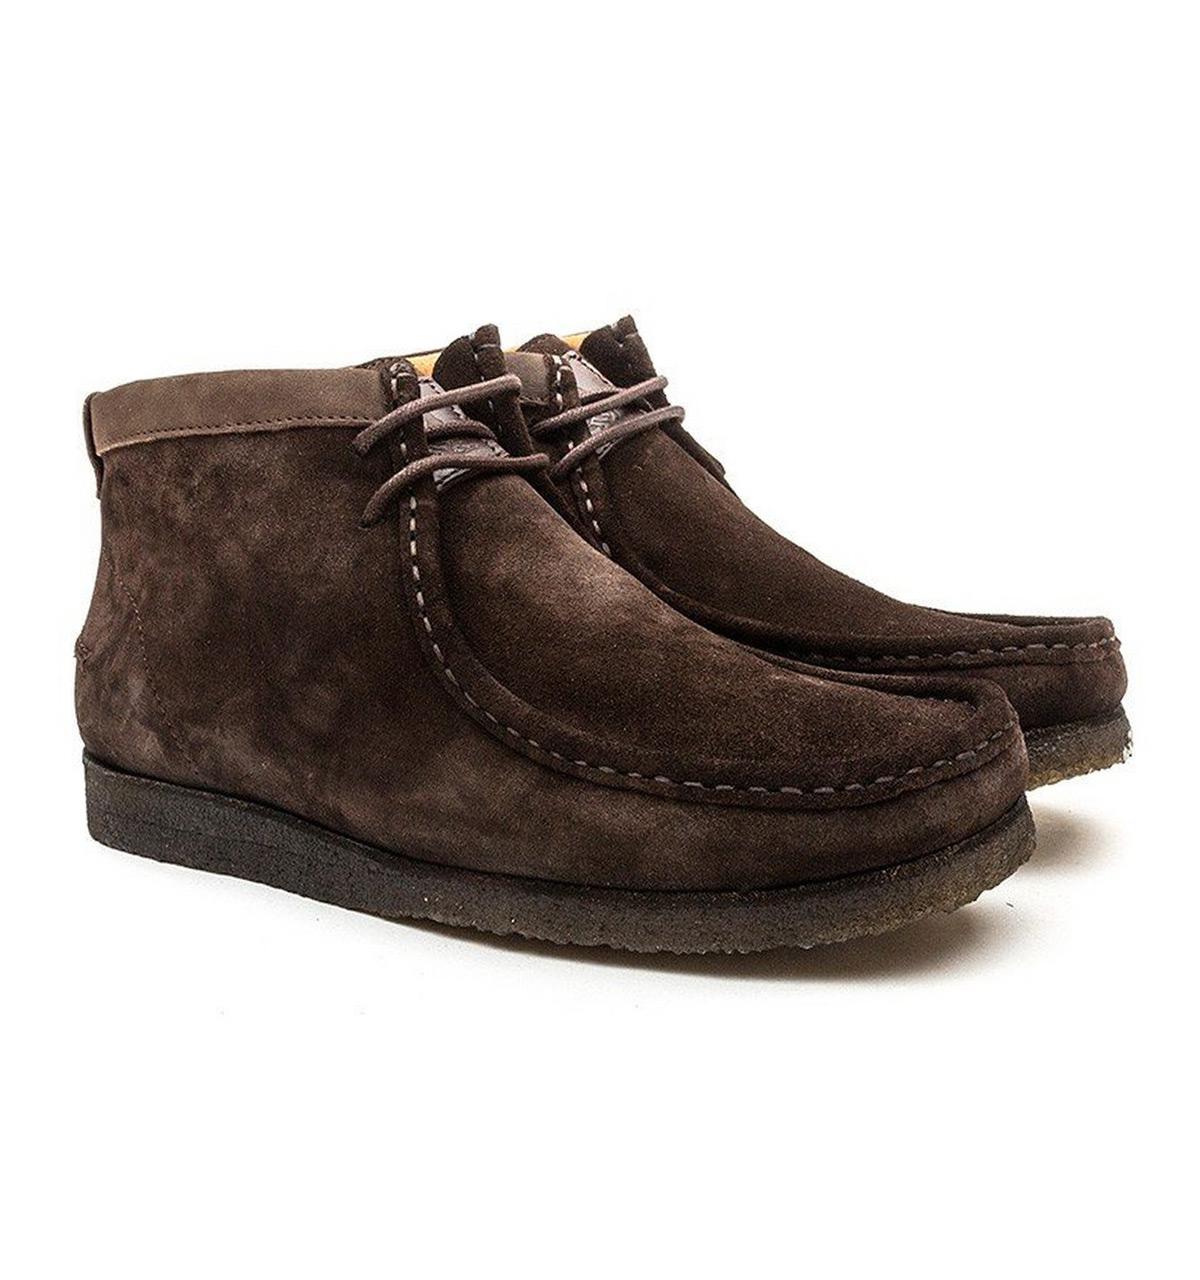 Hush Puppies Davenport High Chocolate Brown Suede Chukka Boots for Men ...